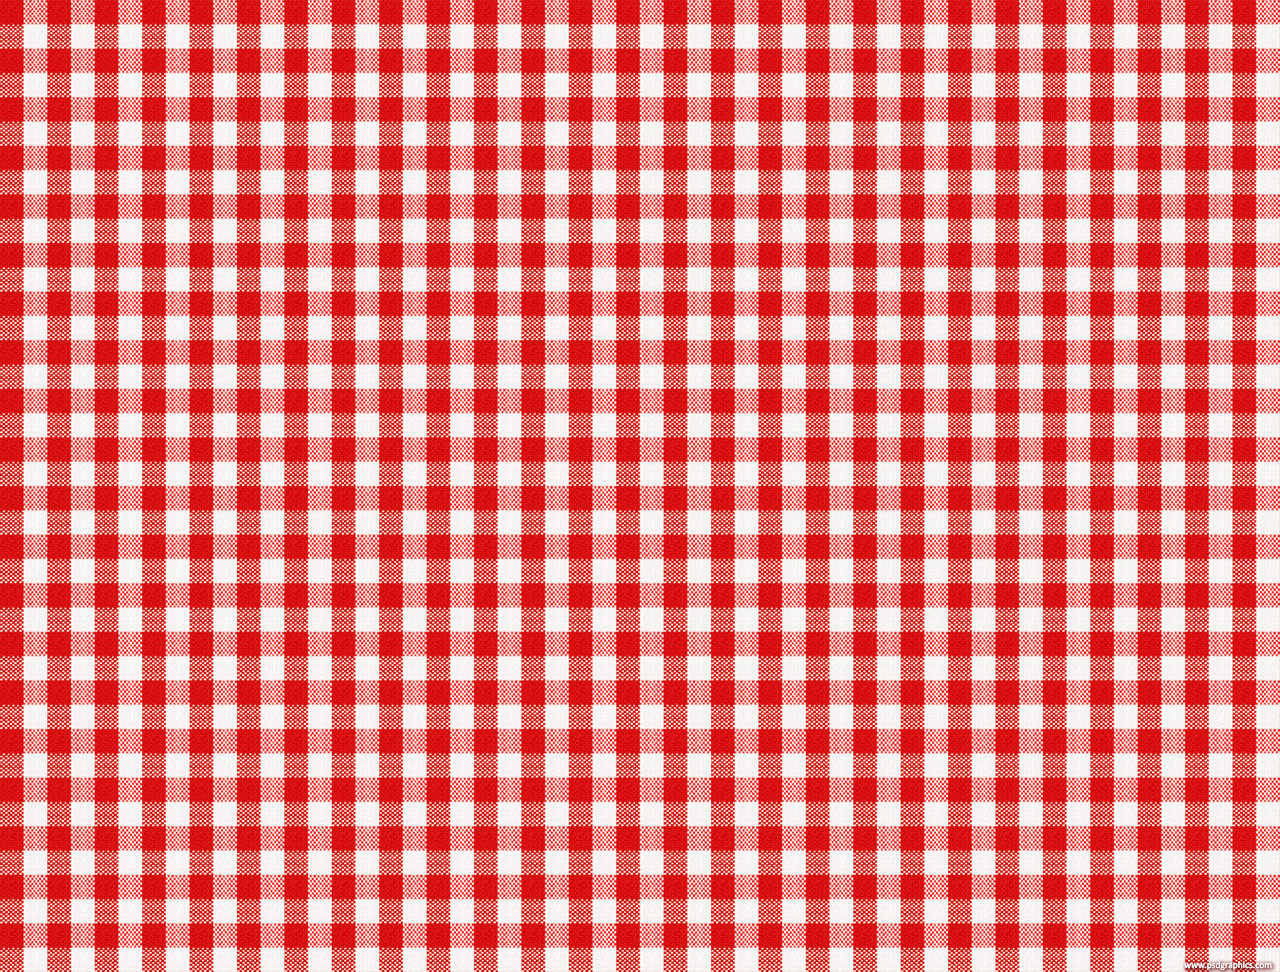 red and white checkered wallpaper wallpapersafari images small